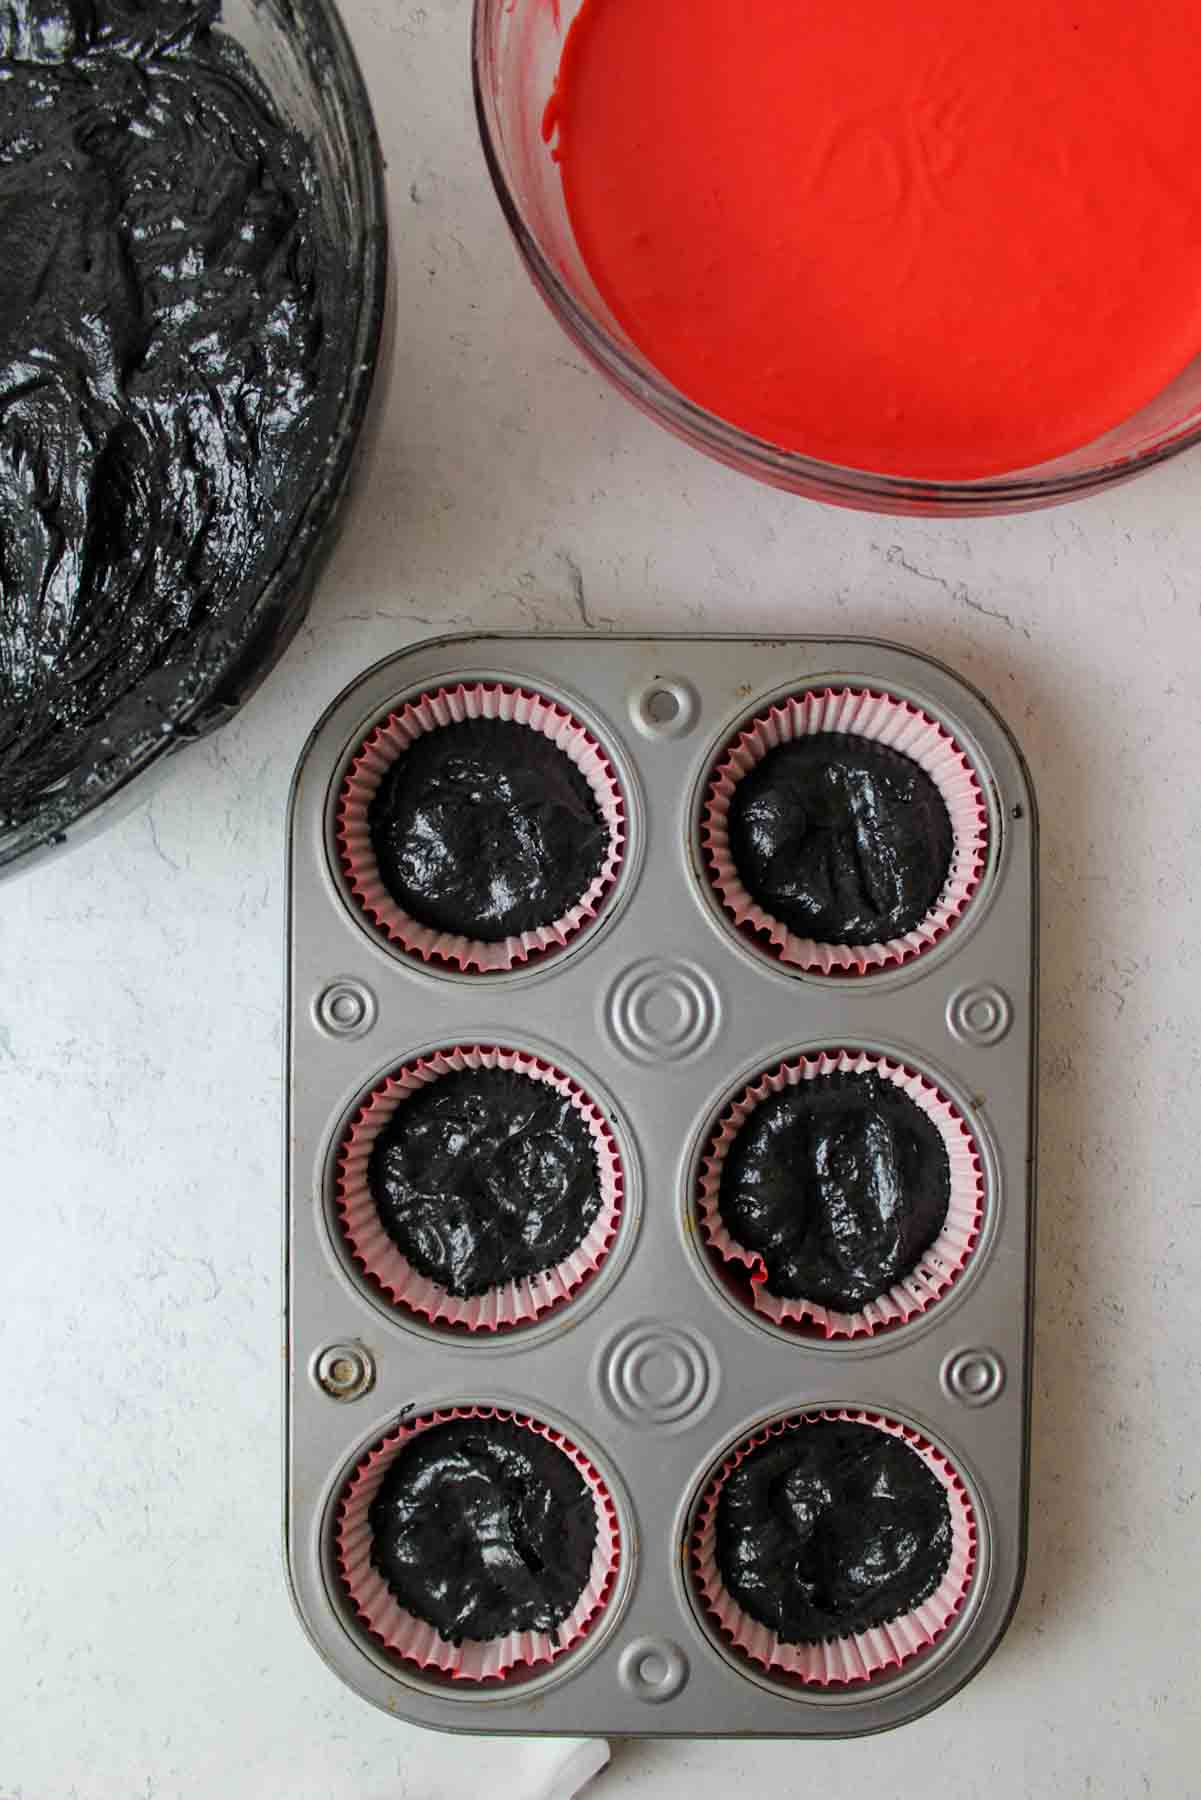 black cupcake batter in bottom of lined muffin tin.